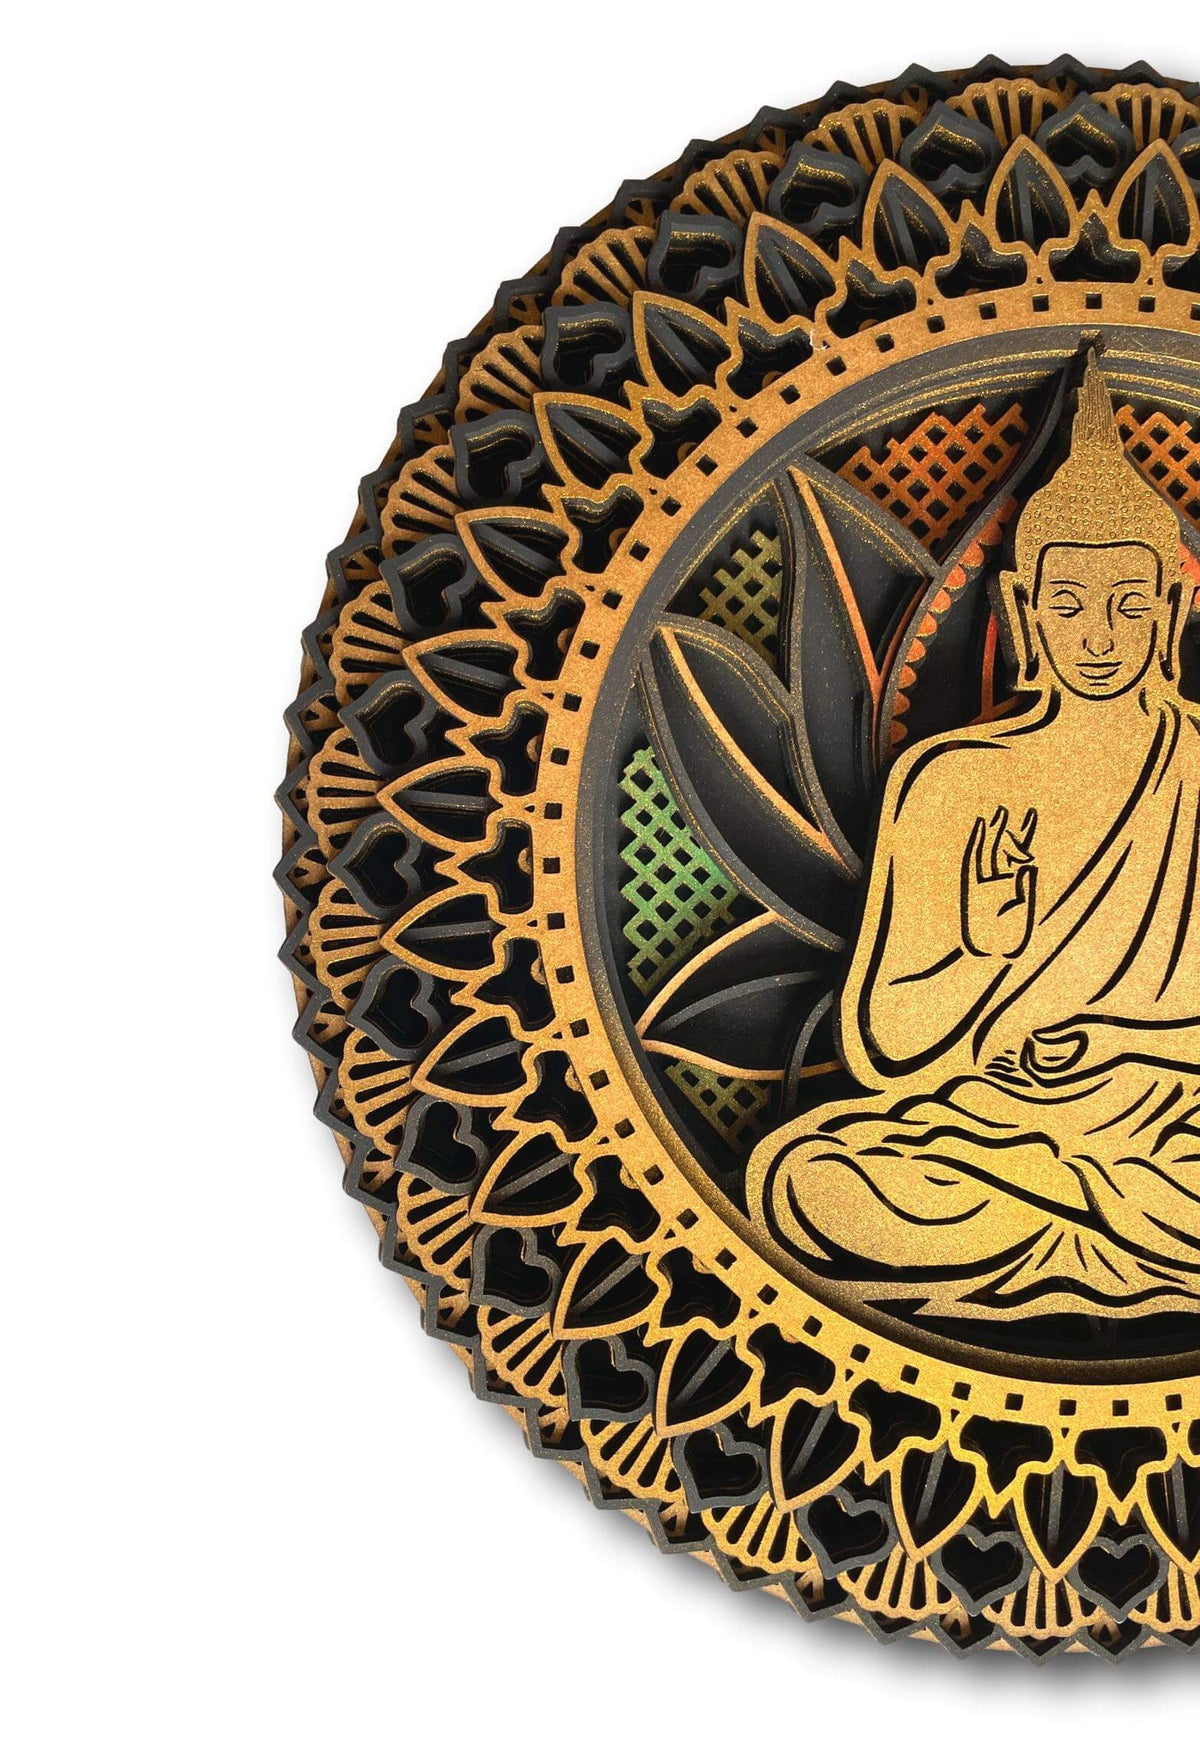 Unique Gold Buddha Wall Art - Intricate Wooden Sacred Geometry Decor- Handmade In Thailand 🇹🇭